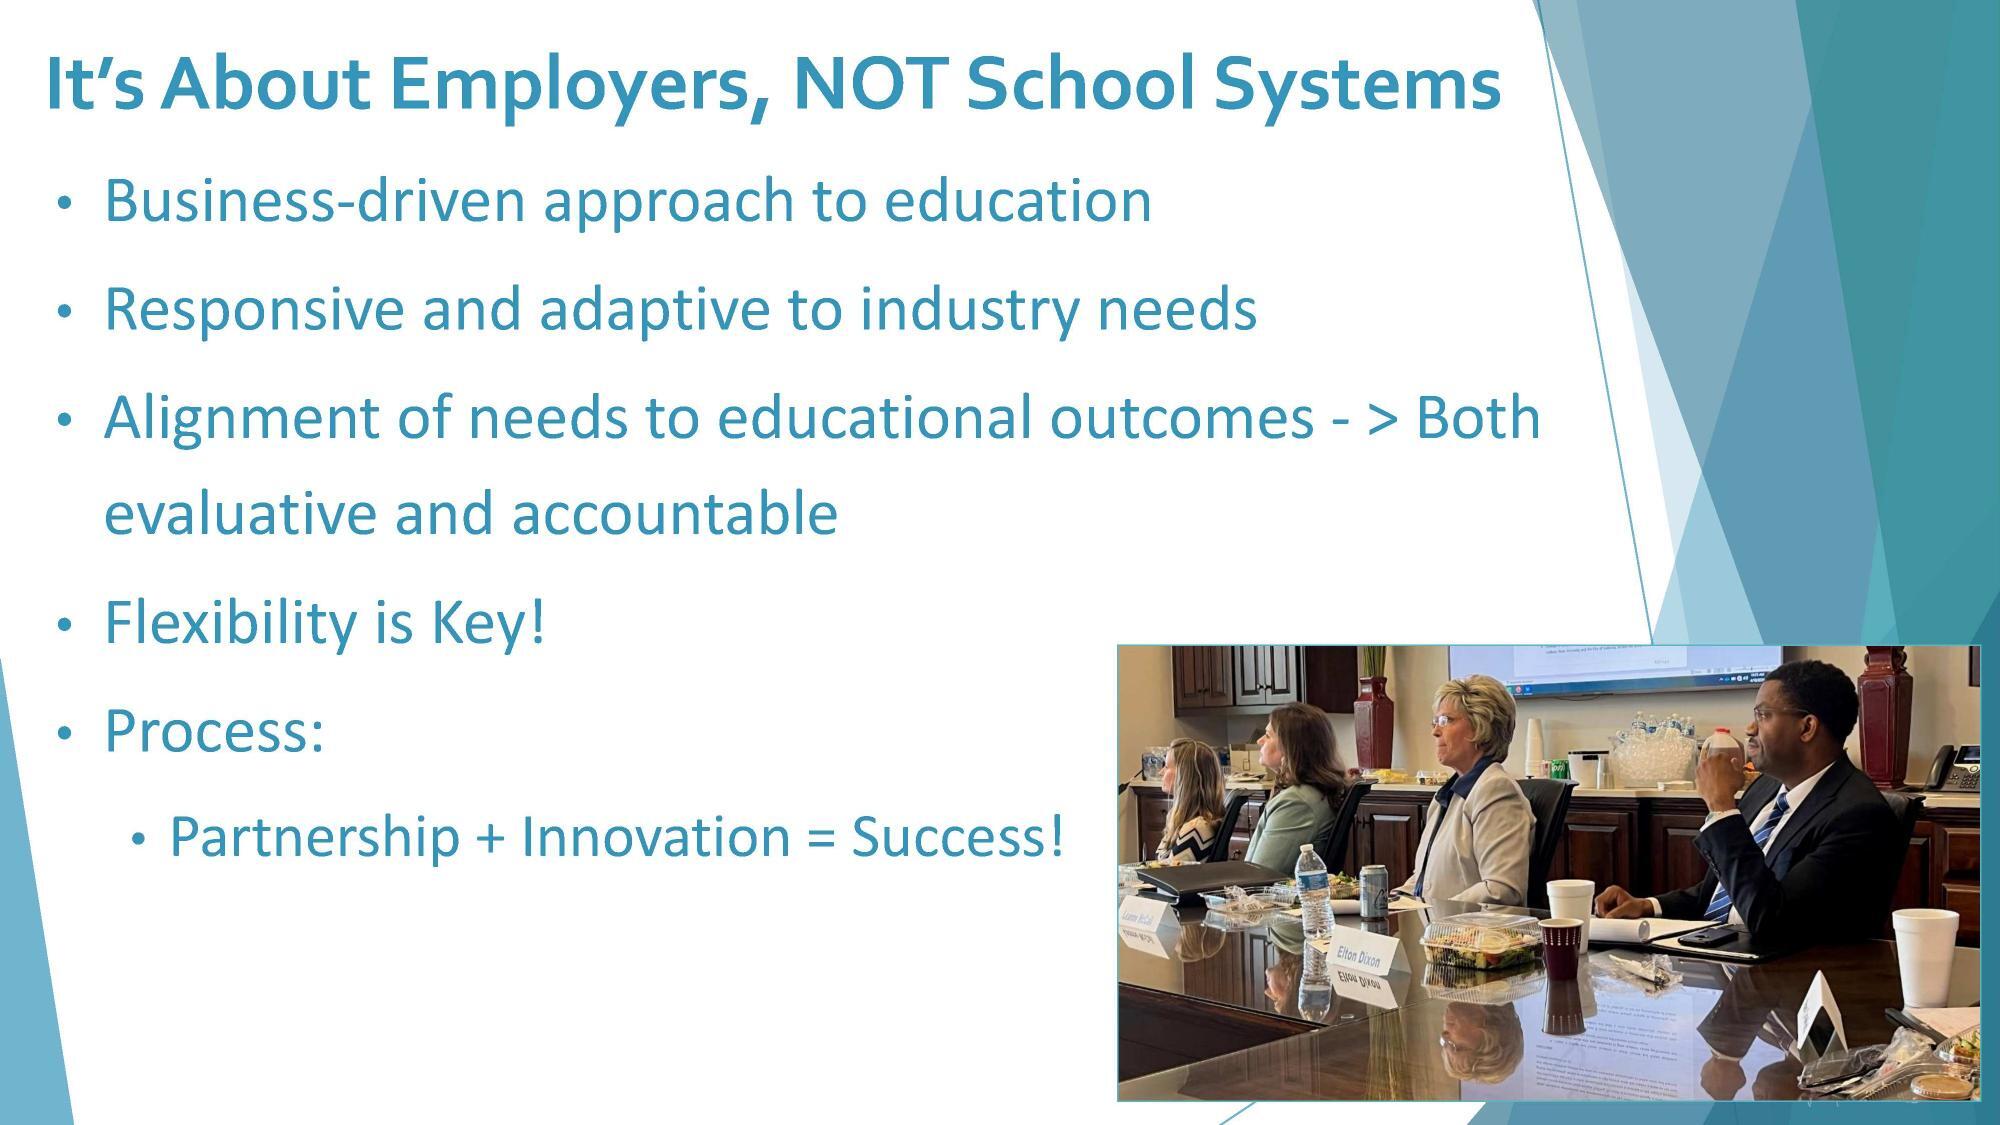 It's About Employers, NOT School Systems